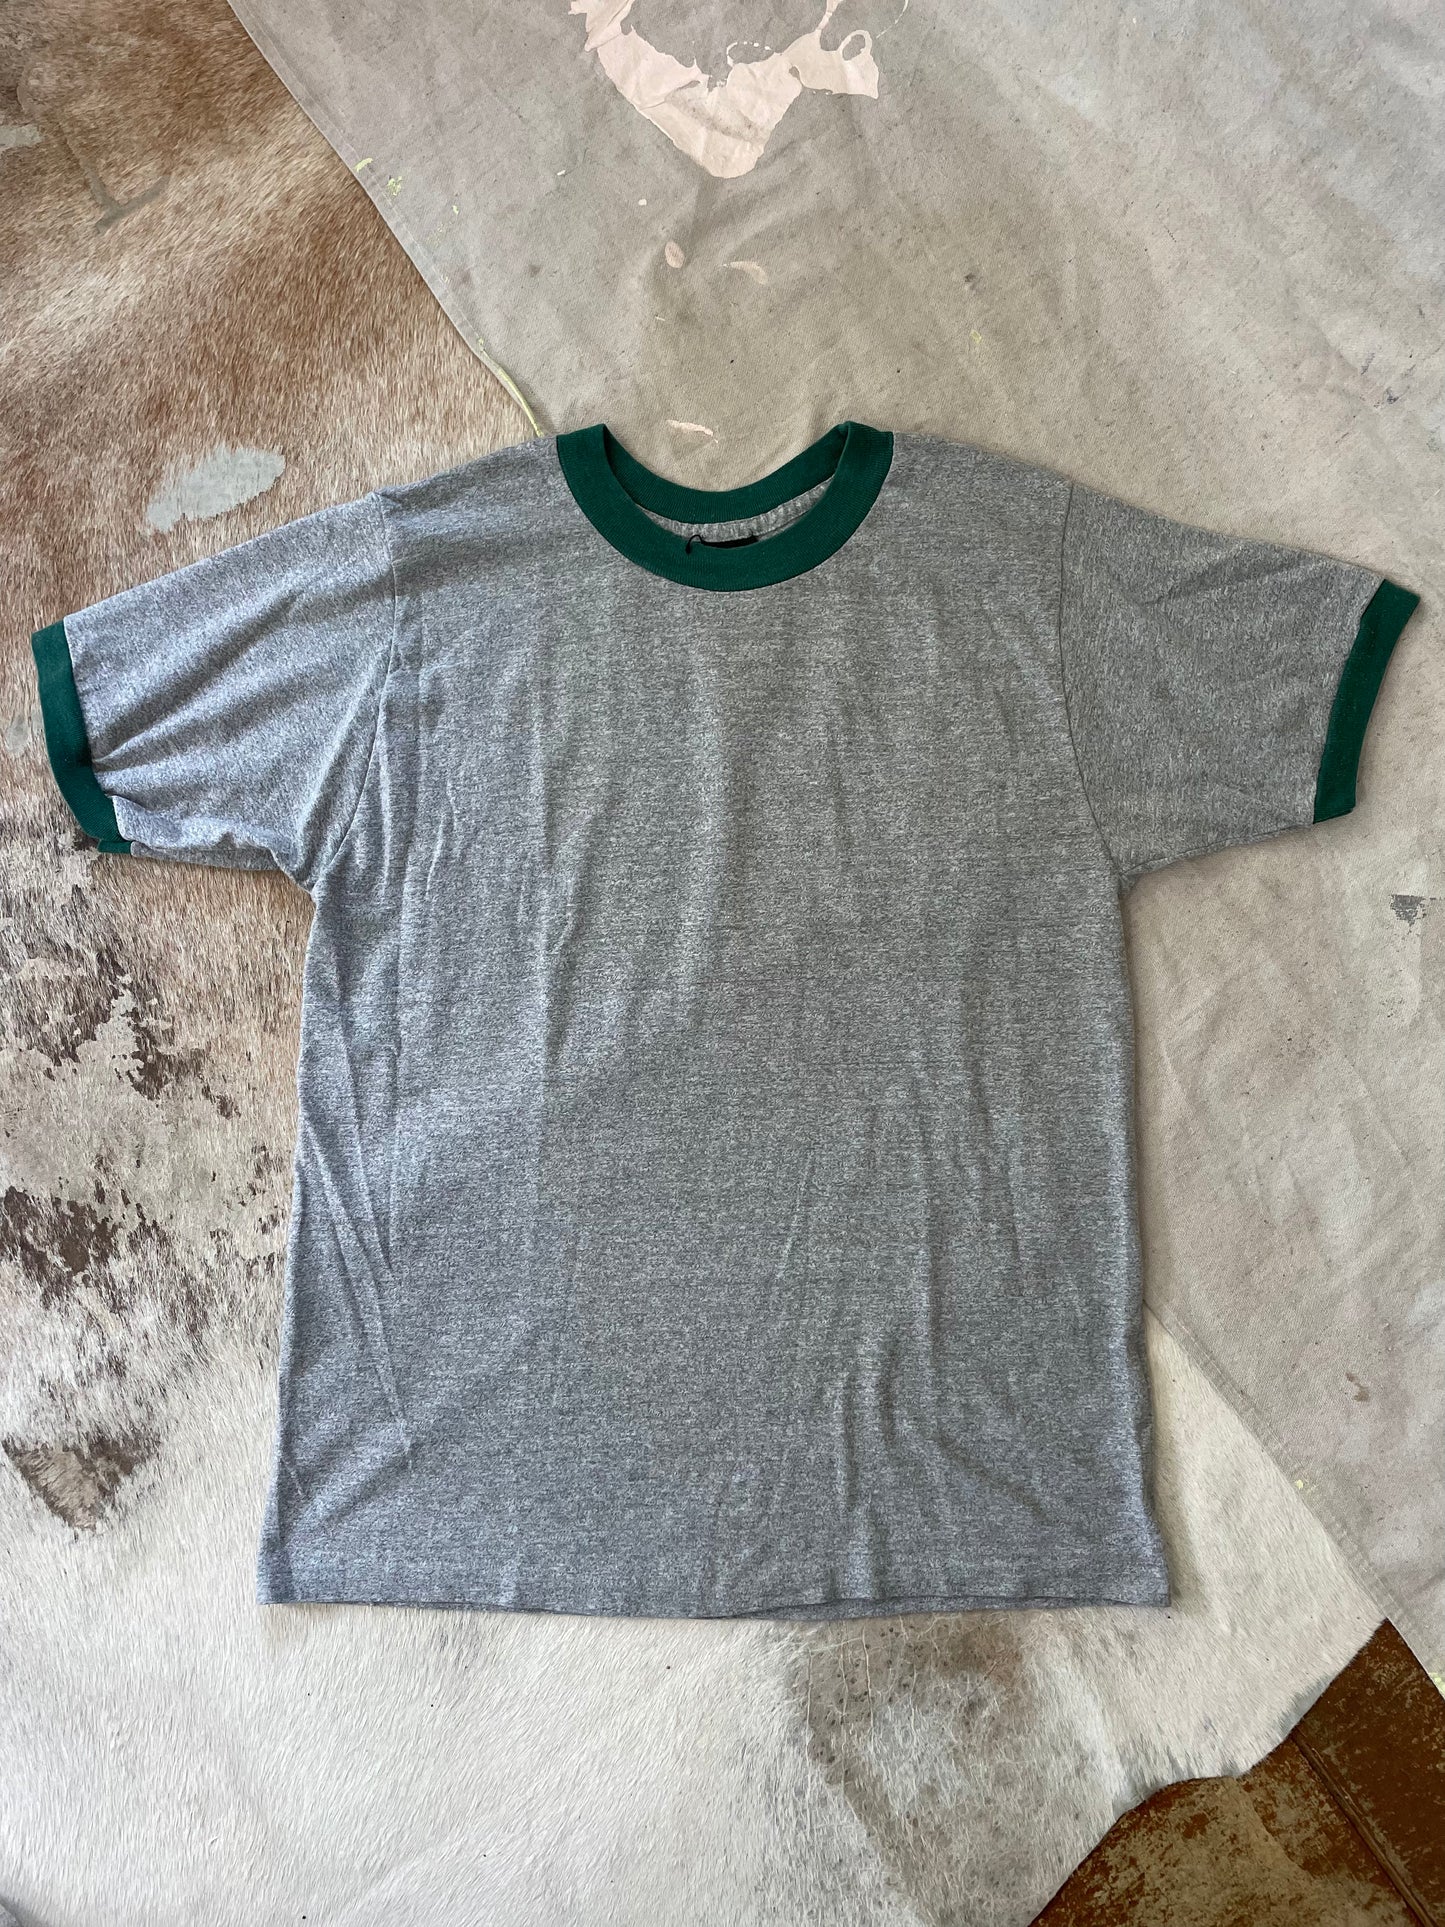 80s Grey and Green Ringer Tee